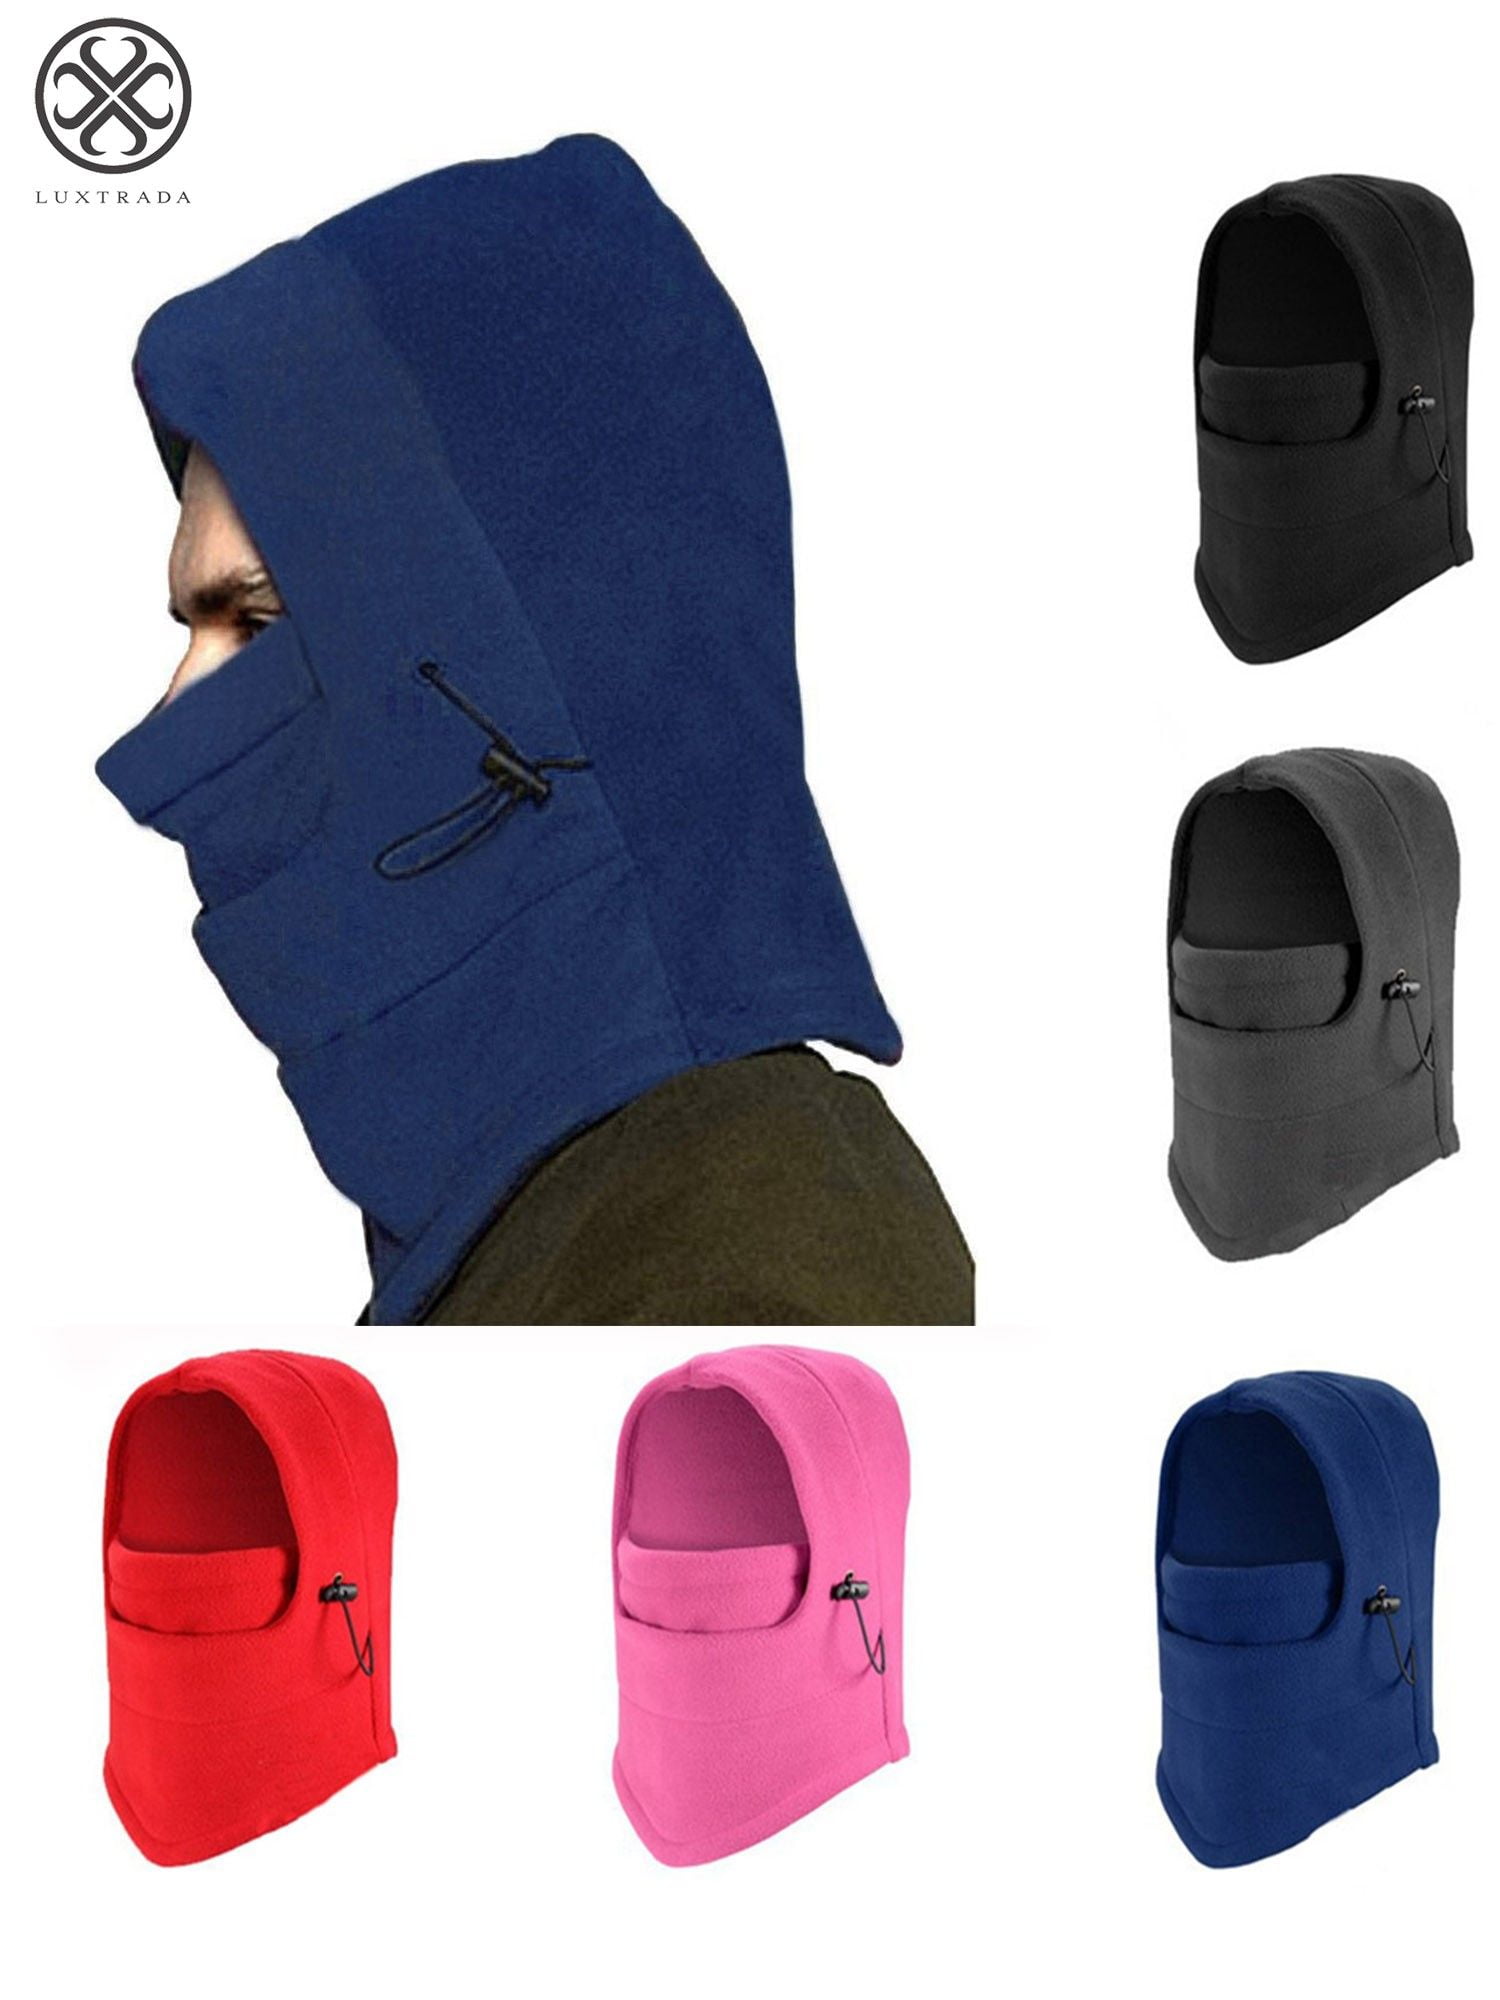 Ski Balaclava Windproof Fleece Neck Winter Warm Full Face Mask for Cold Weather 